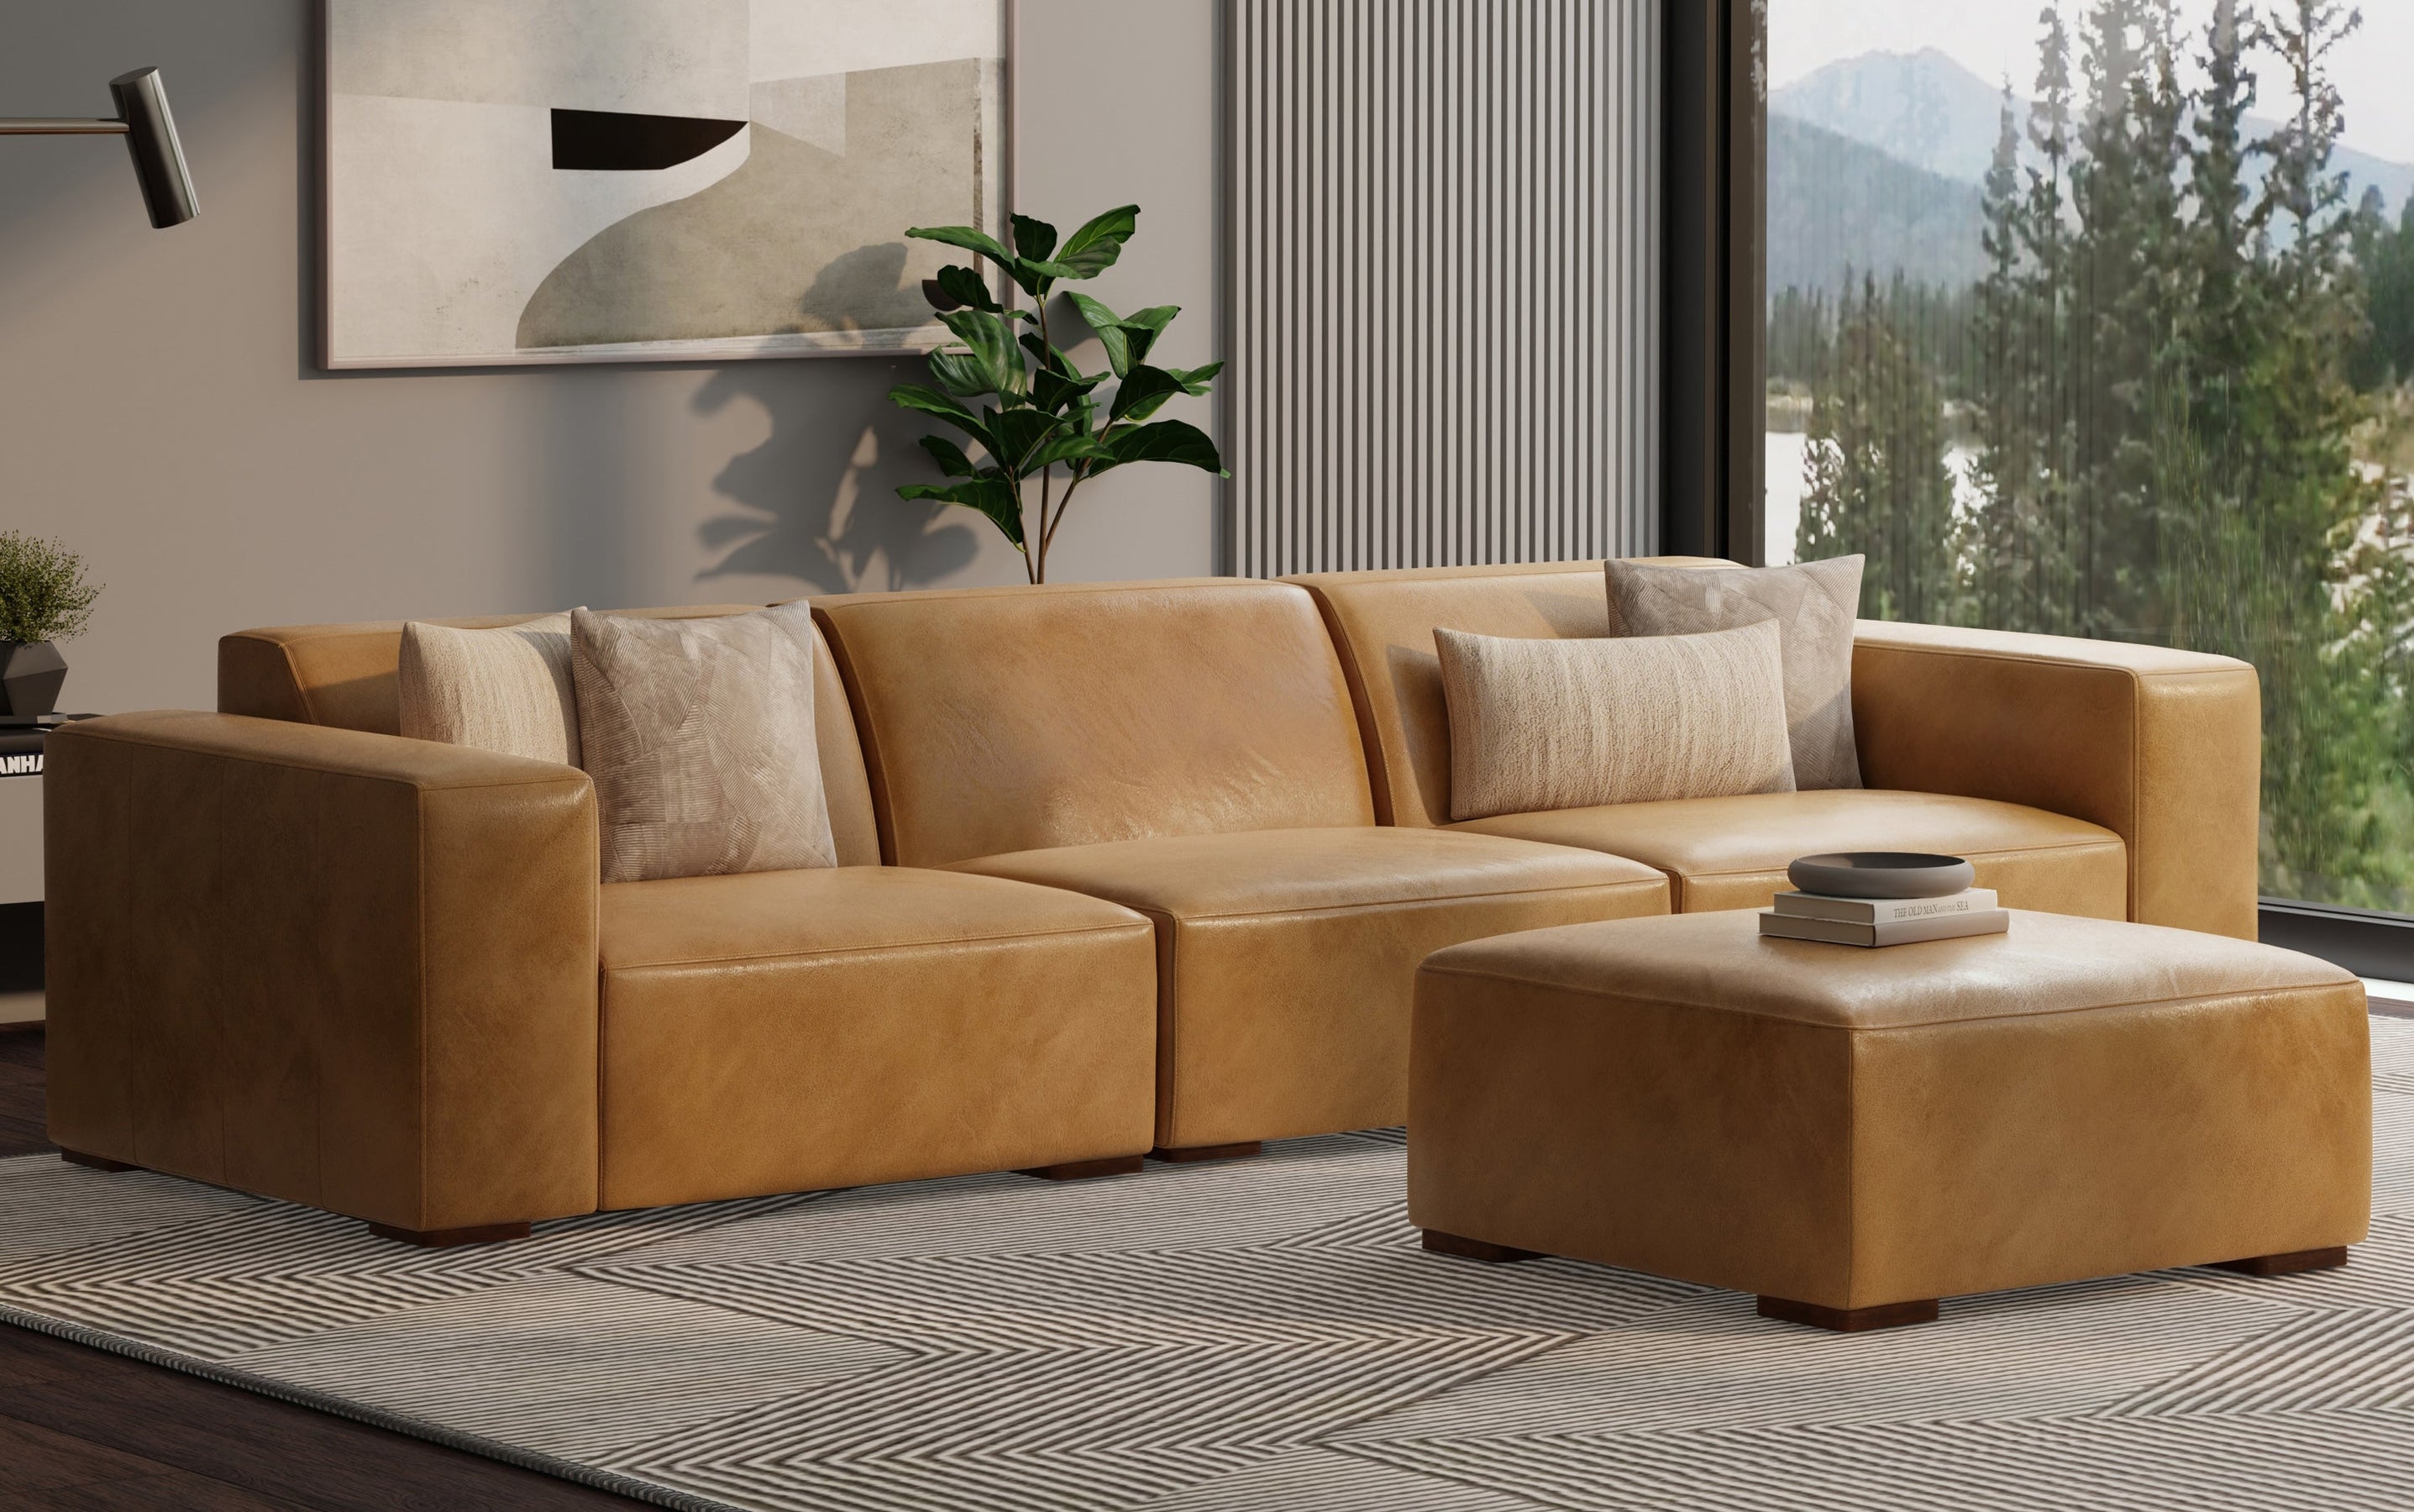 Sienna Genuine Leather | Rex 3 Seater Sofa and Ottoman in Genuine Leather